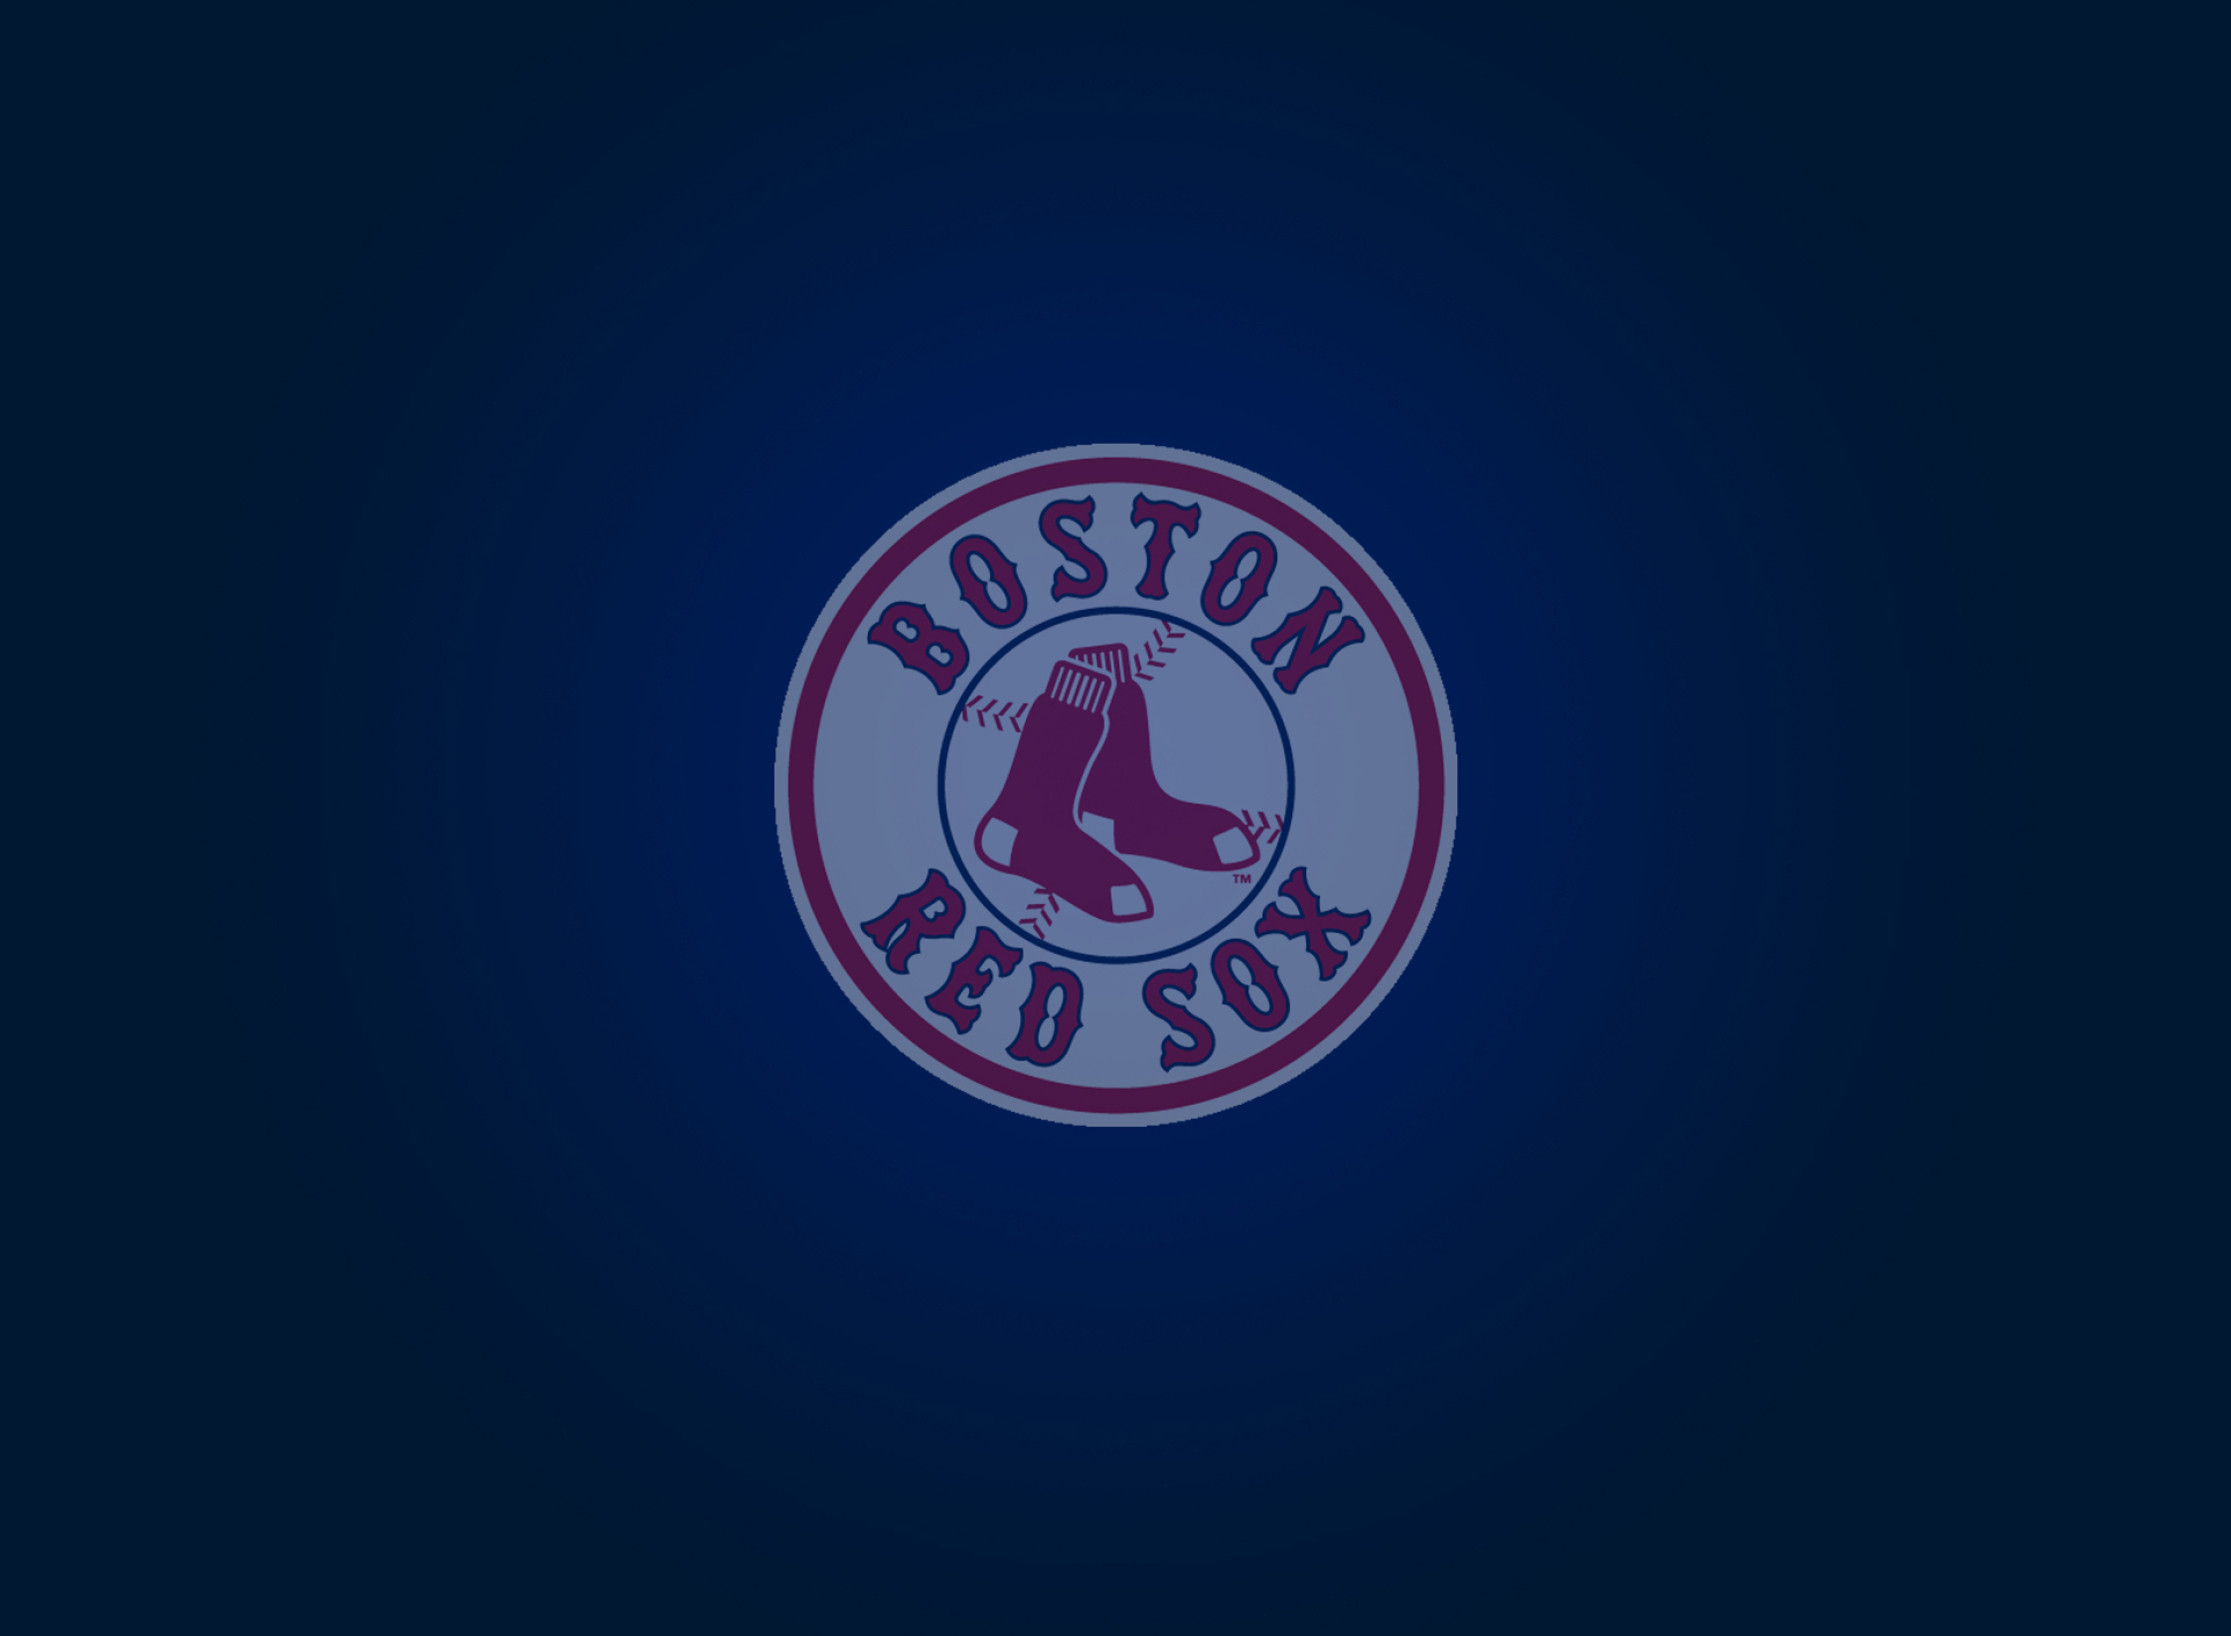 Boston Red Sox Iphone Wallpaper Boston red sox